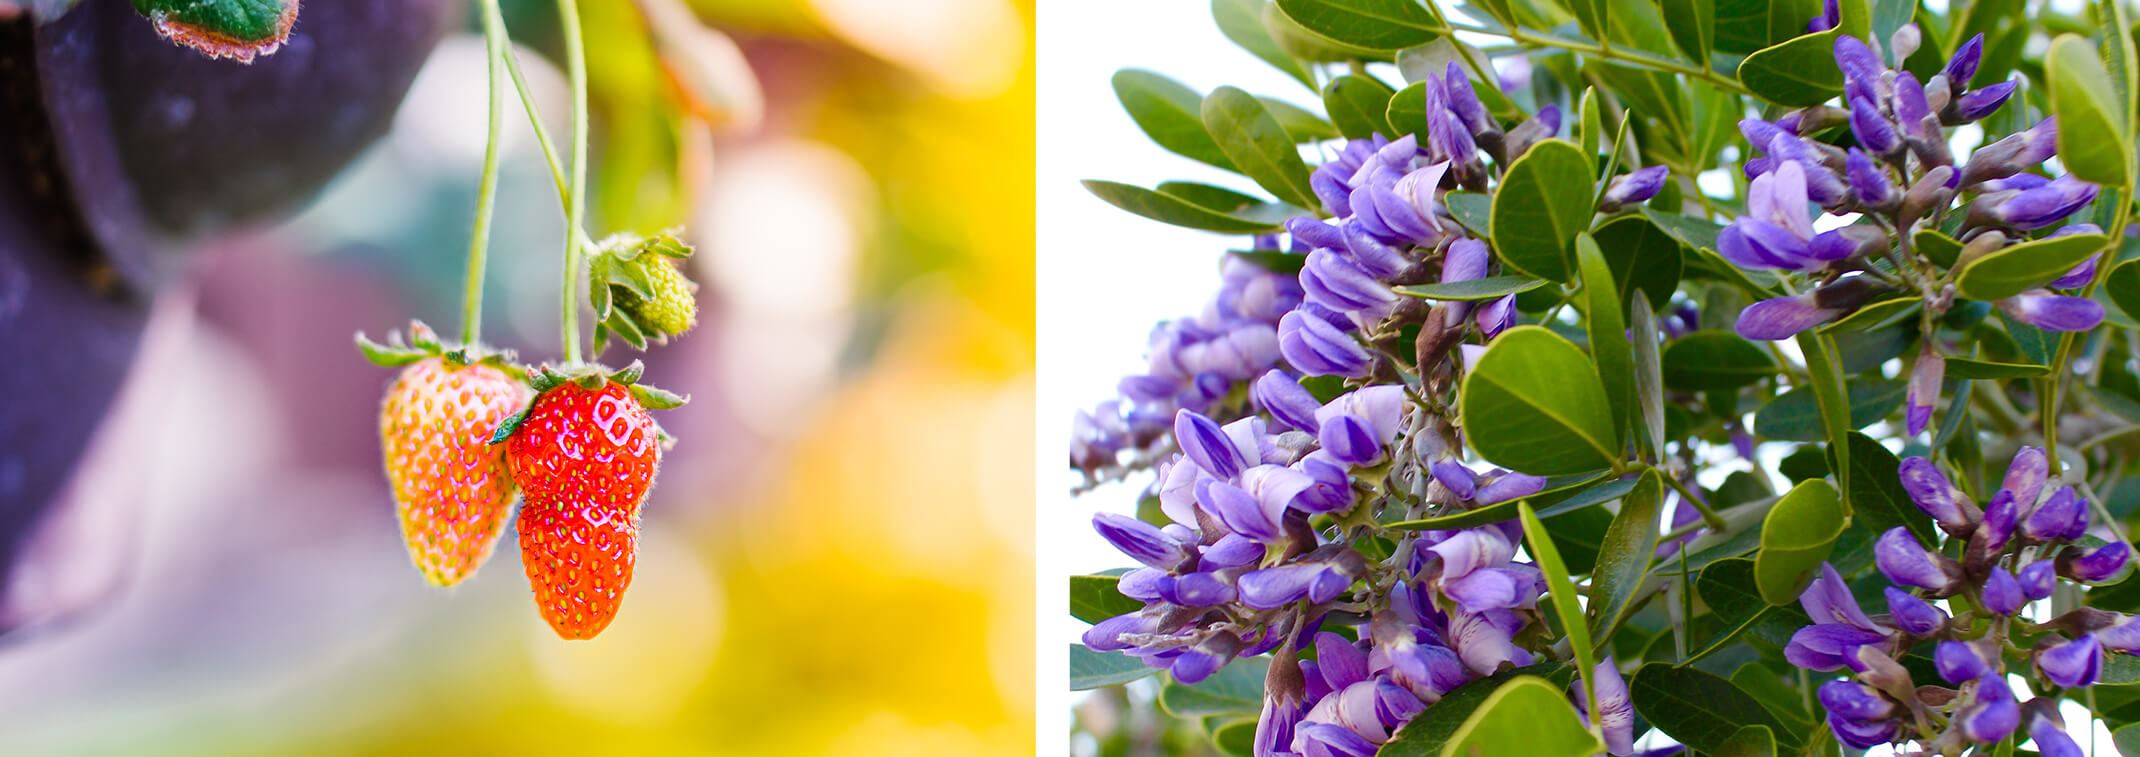 2 images: Strawberries growing and a Texas mountain laurel tree in bloom